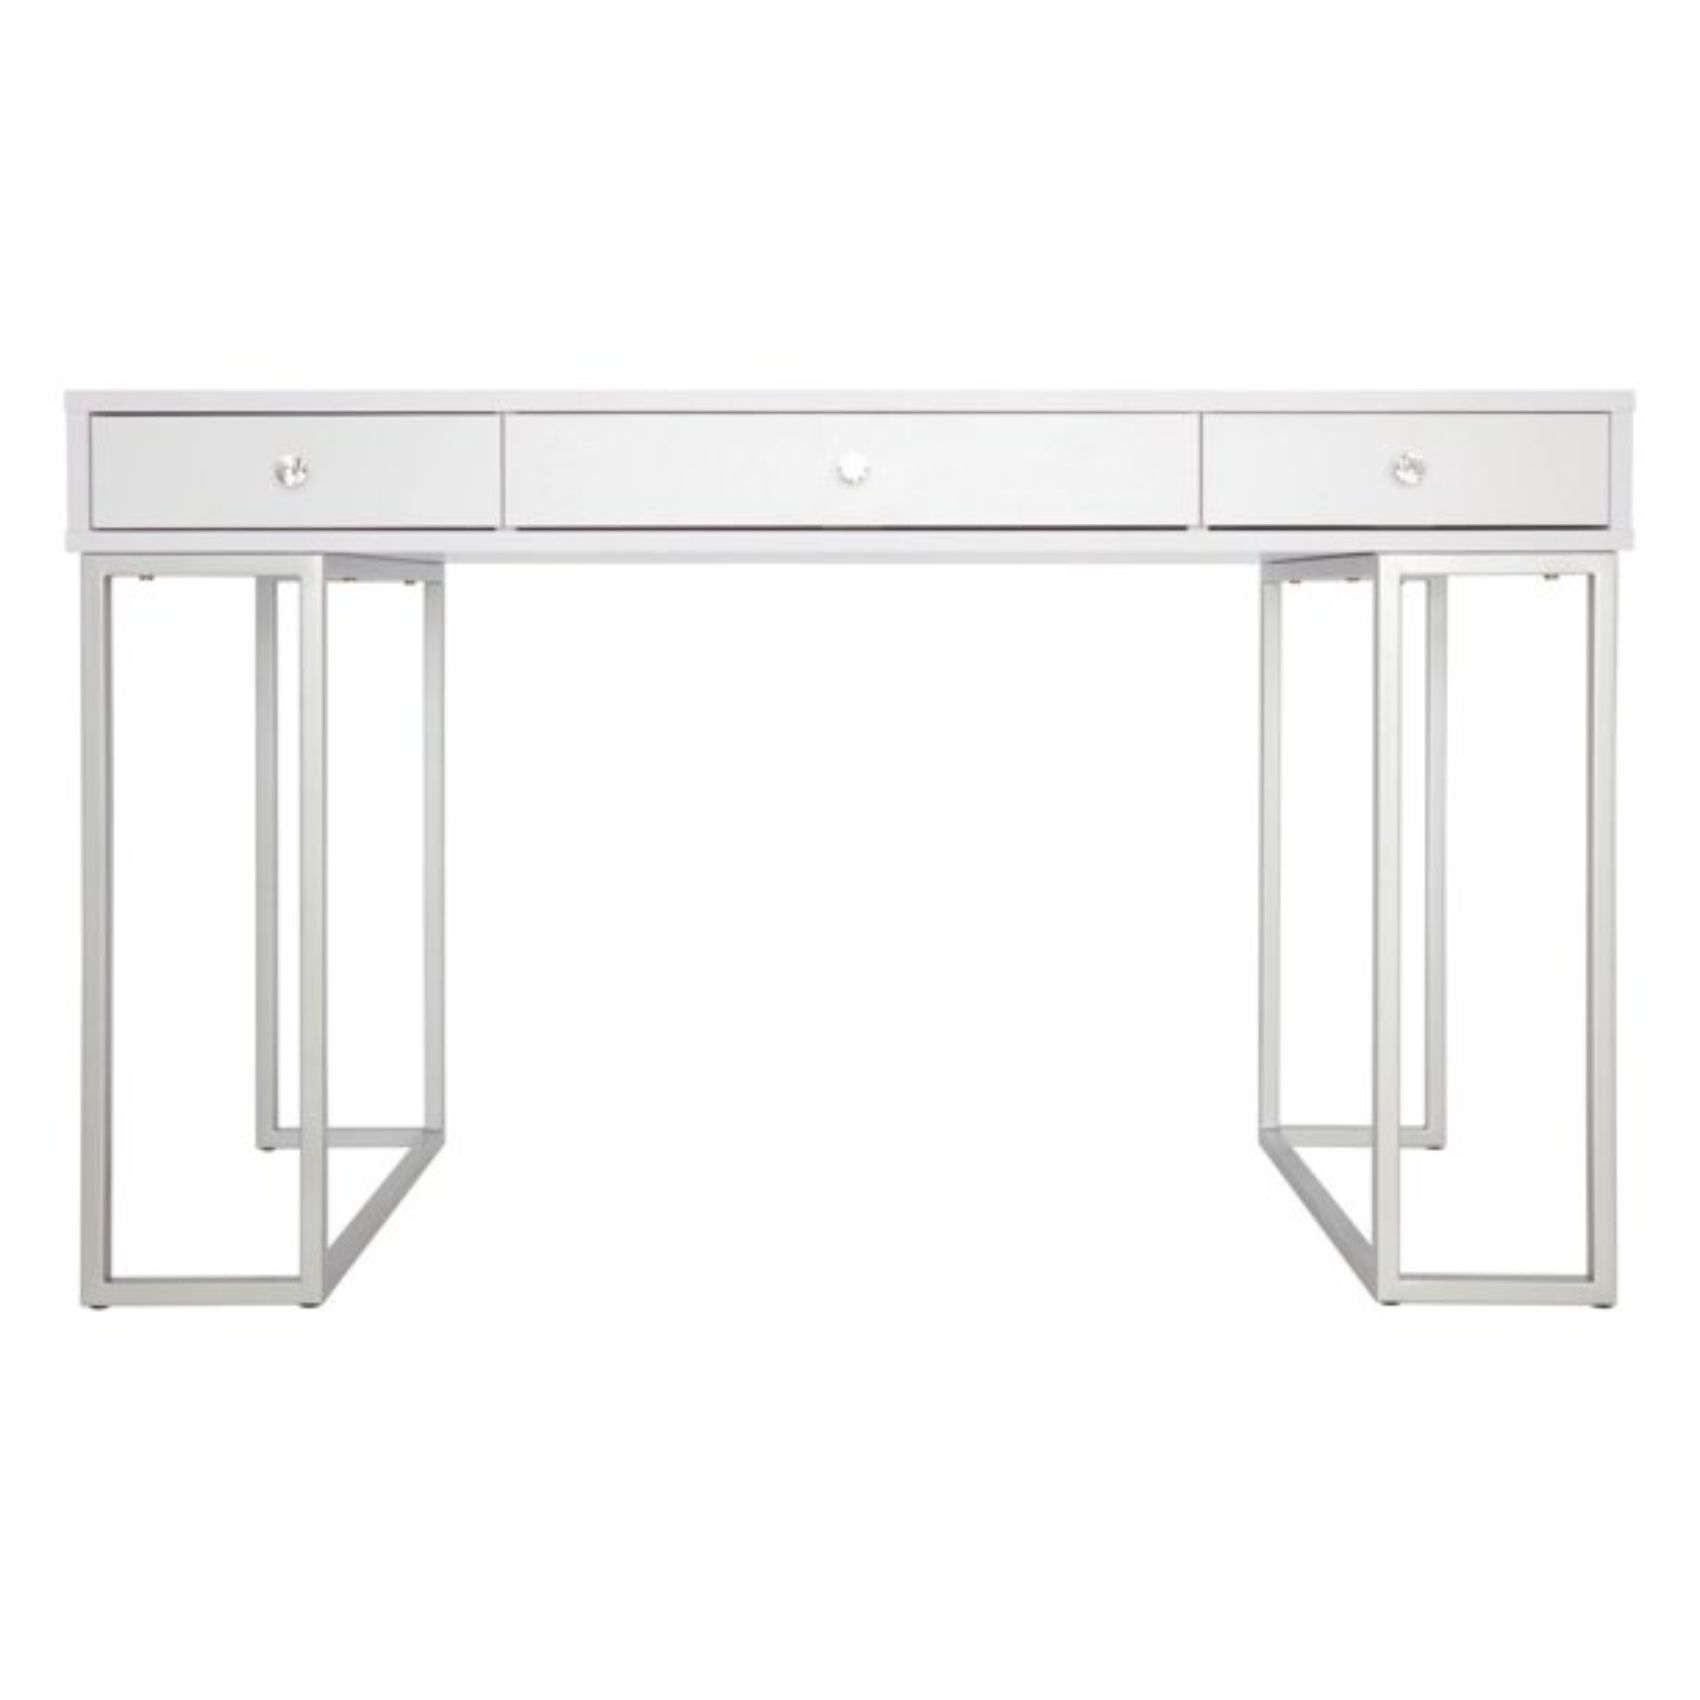 Impressions Vanity Premium Makeup Desk, Celeste Modern Table with 3 Drawers and Crystal Knobs, Perfect for Bedroom Decore (White) - image 1 of 6